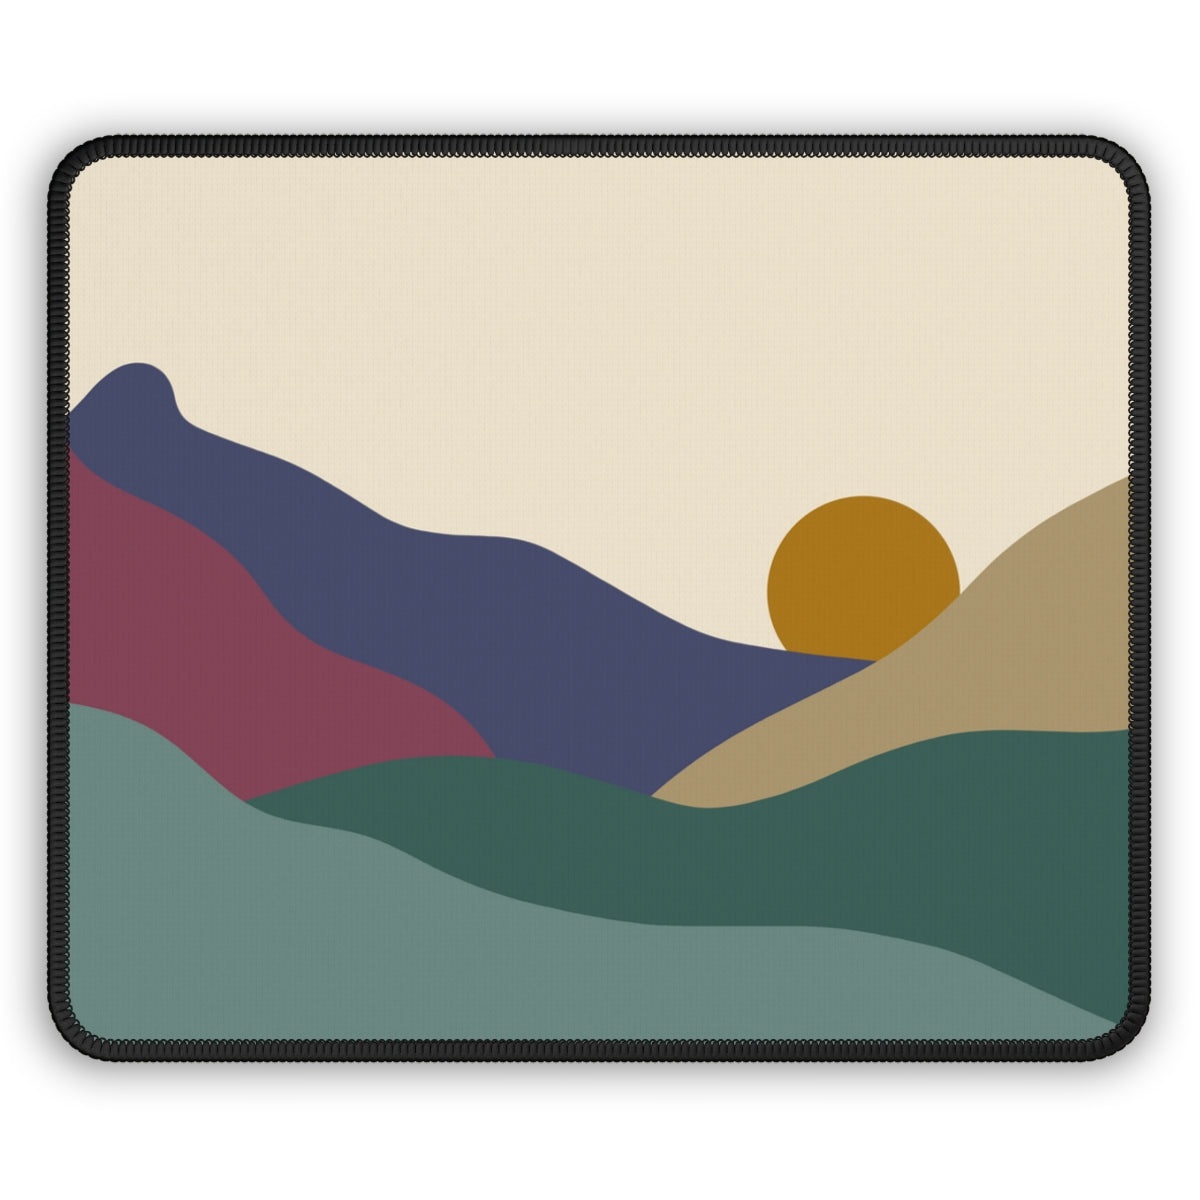 Boho Mountains Gaming Mouse Pad - Desk Cookies